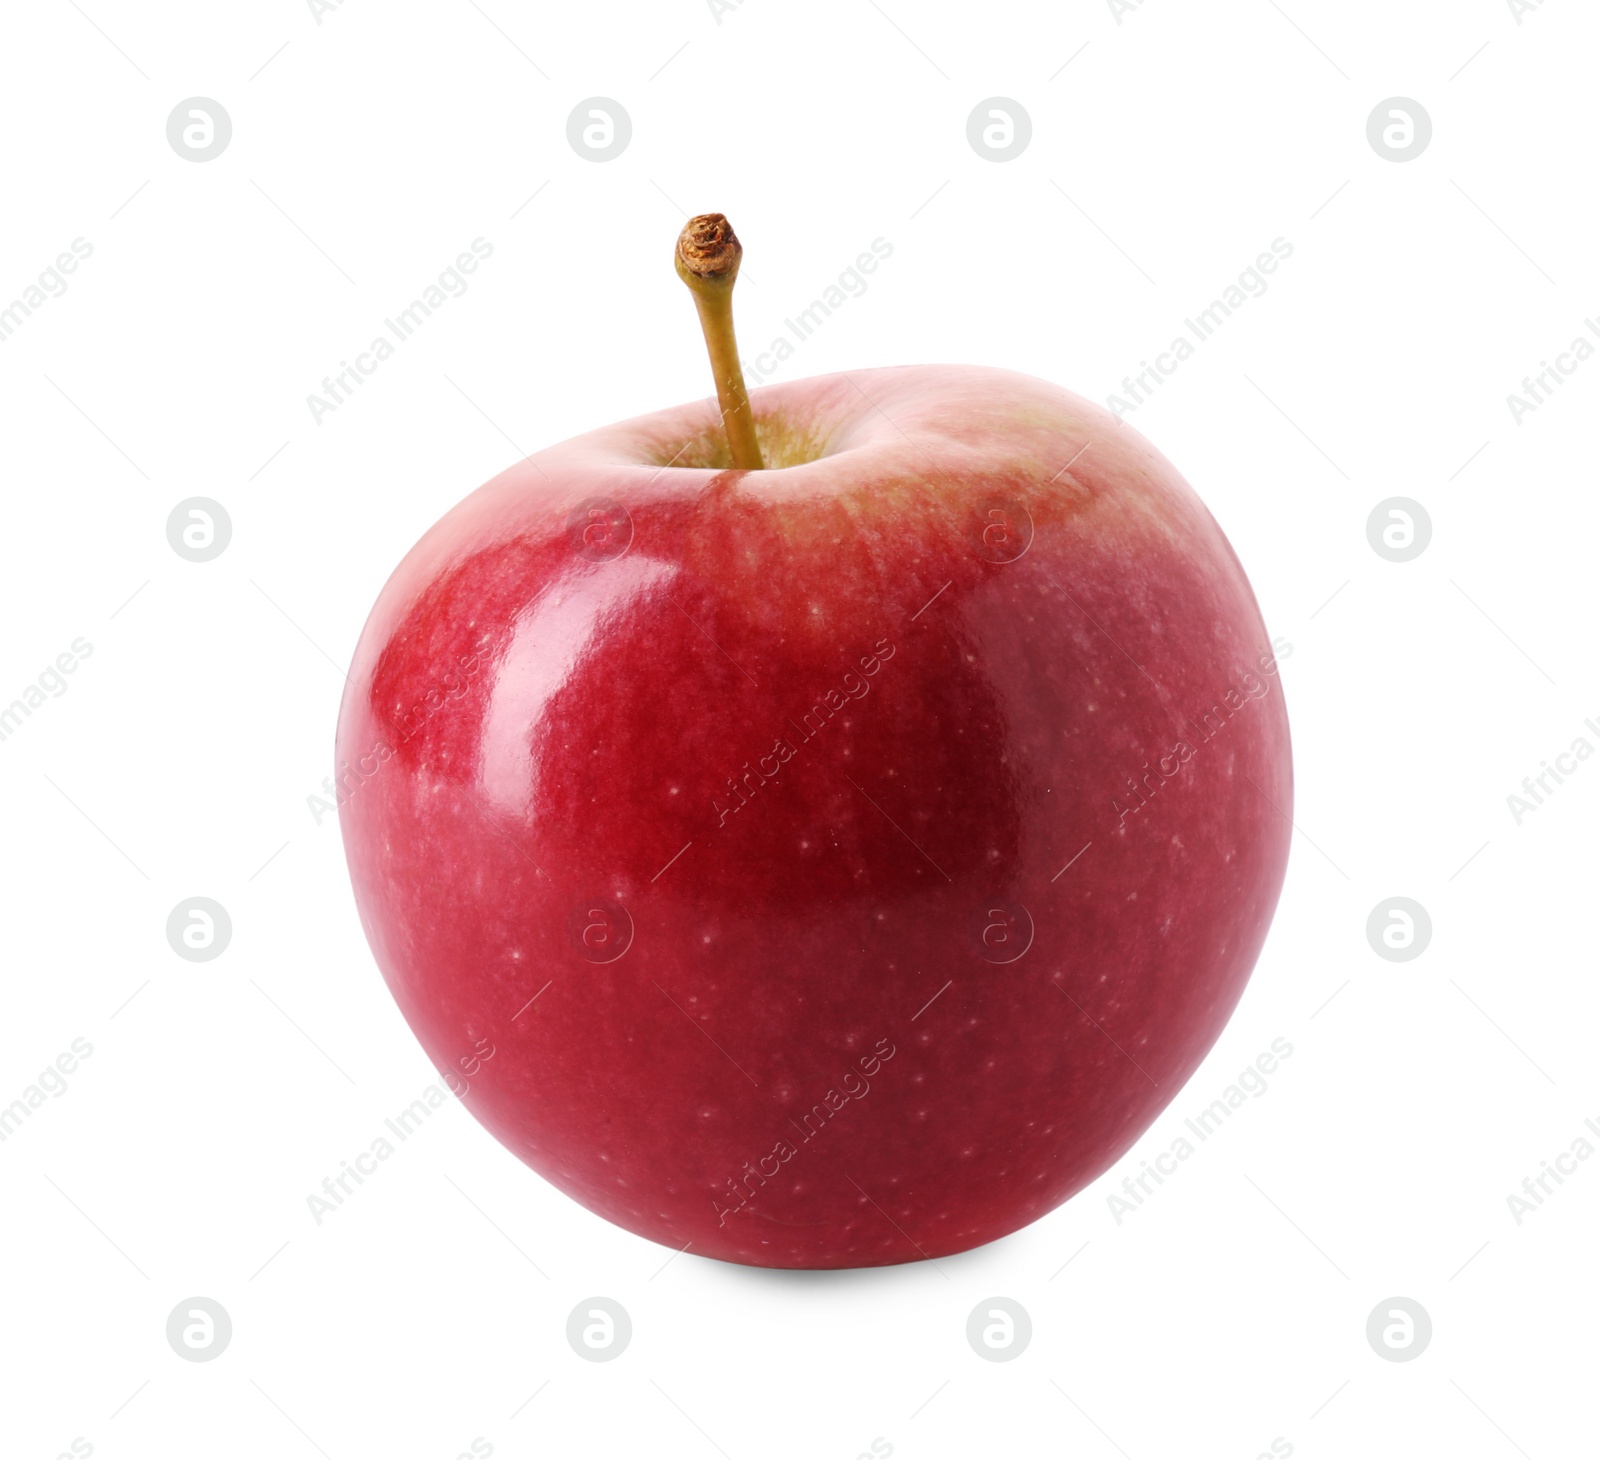 Photo of One ripe red apple isolated on white